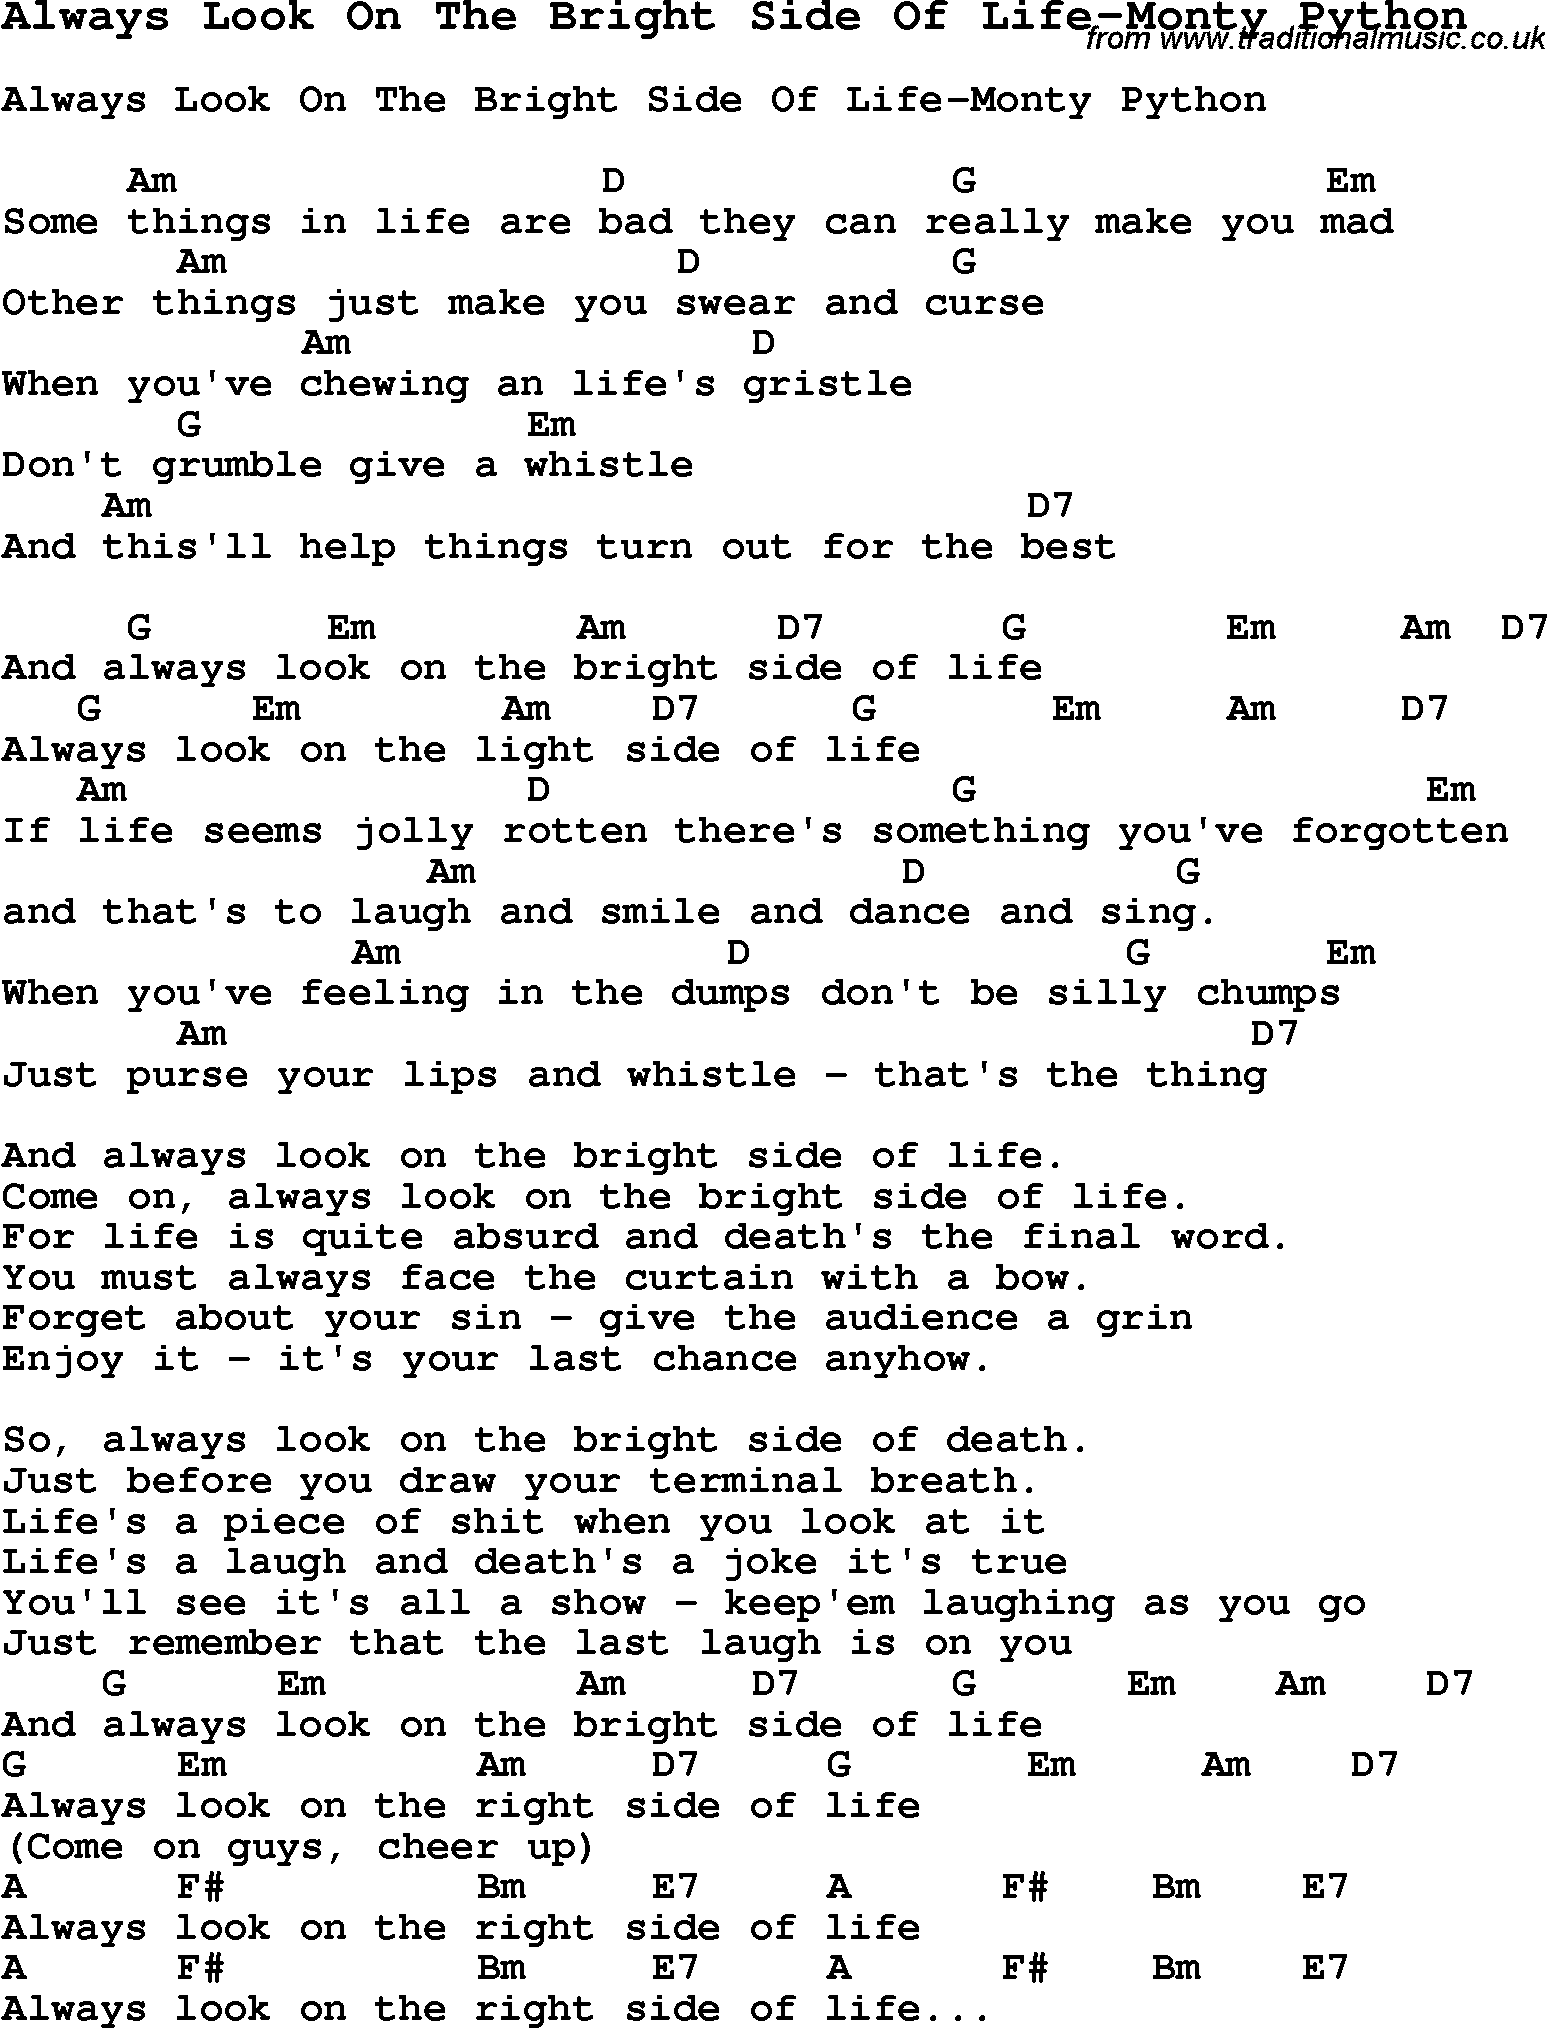 Summer-Camp Song, Always Look On The Bright Side Of Life-Monty Python, with lyrics and chords for Ukulele, Guitar Banjo etc.